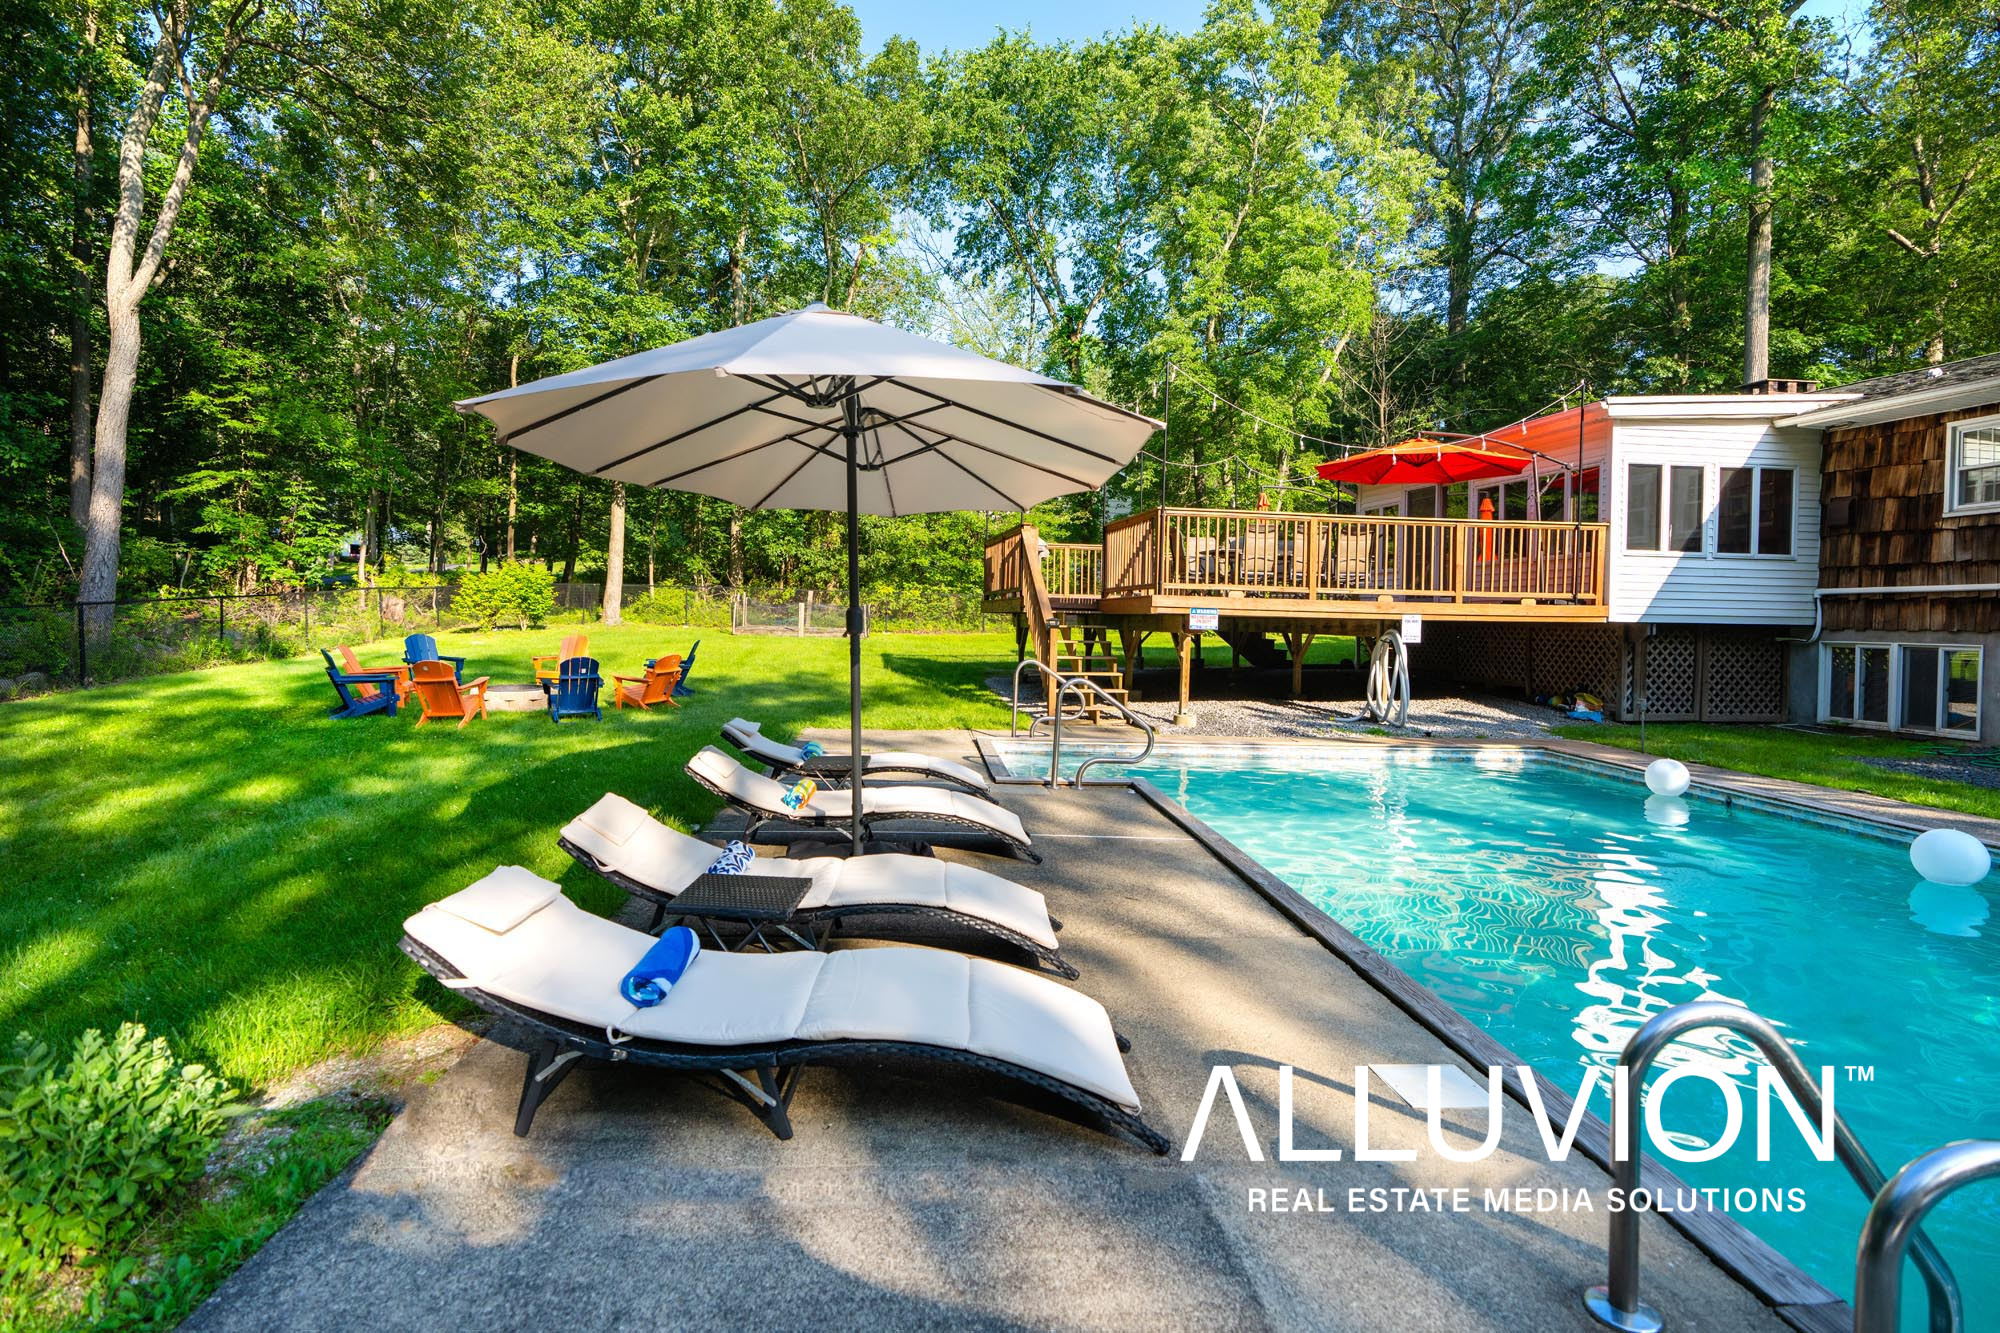 Rediscover the Art of Wellness Travel: A Photo Tour and Review of a Charming Airbnb Home in Woodbury, NY by Alluvion Media's Maxwell Alexander